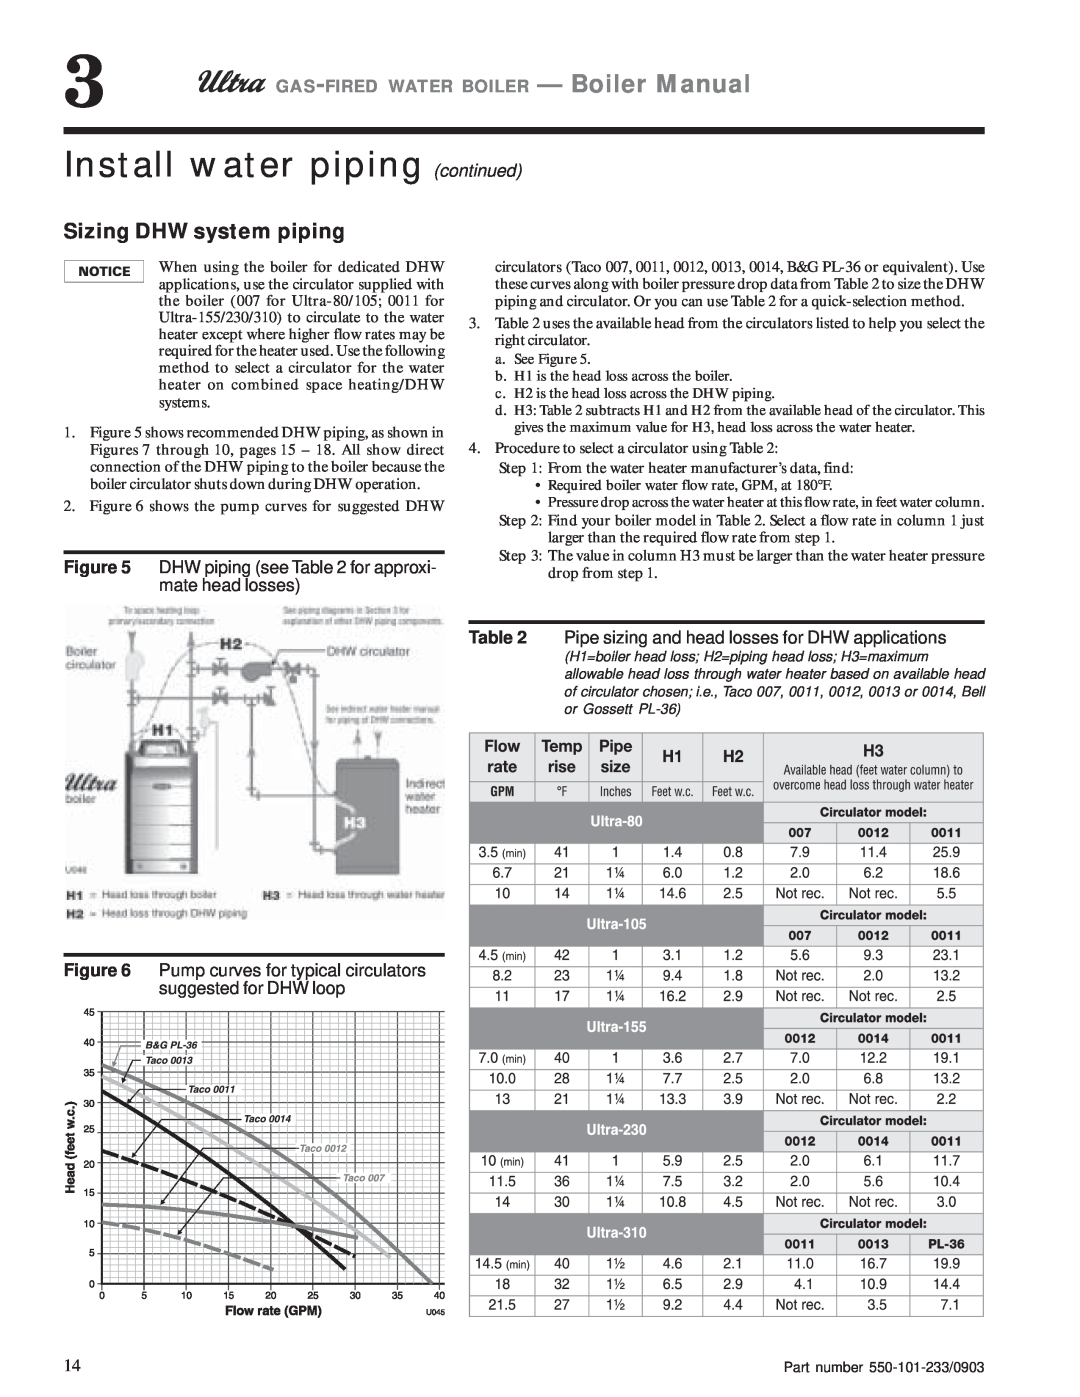 Weil-McLain 155, 80, 230 Install water piping continued, Sizing DHW system piping, GAS-FIRED WATER BOILER - Boiler Manual 